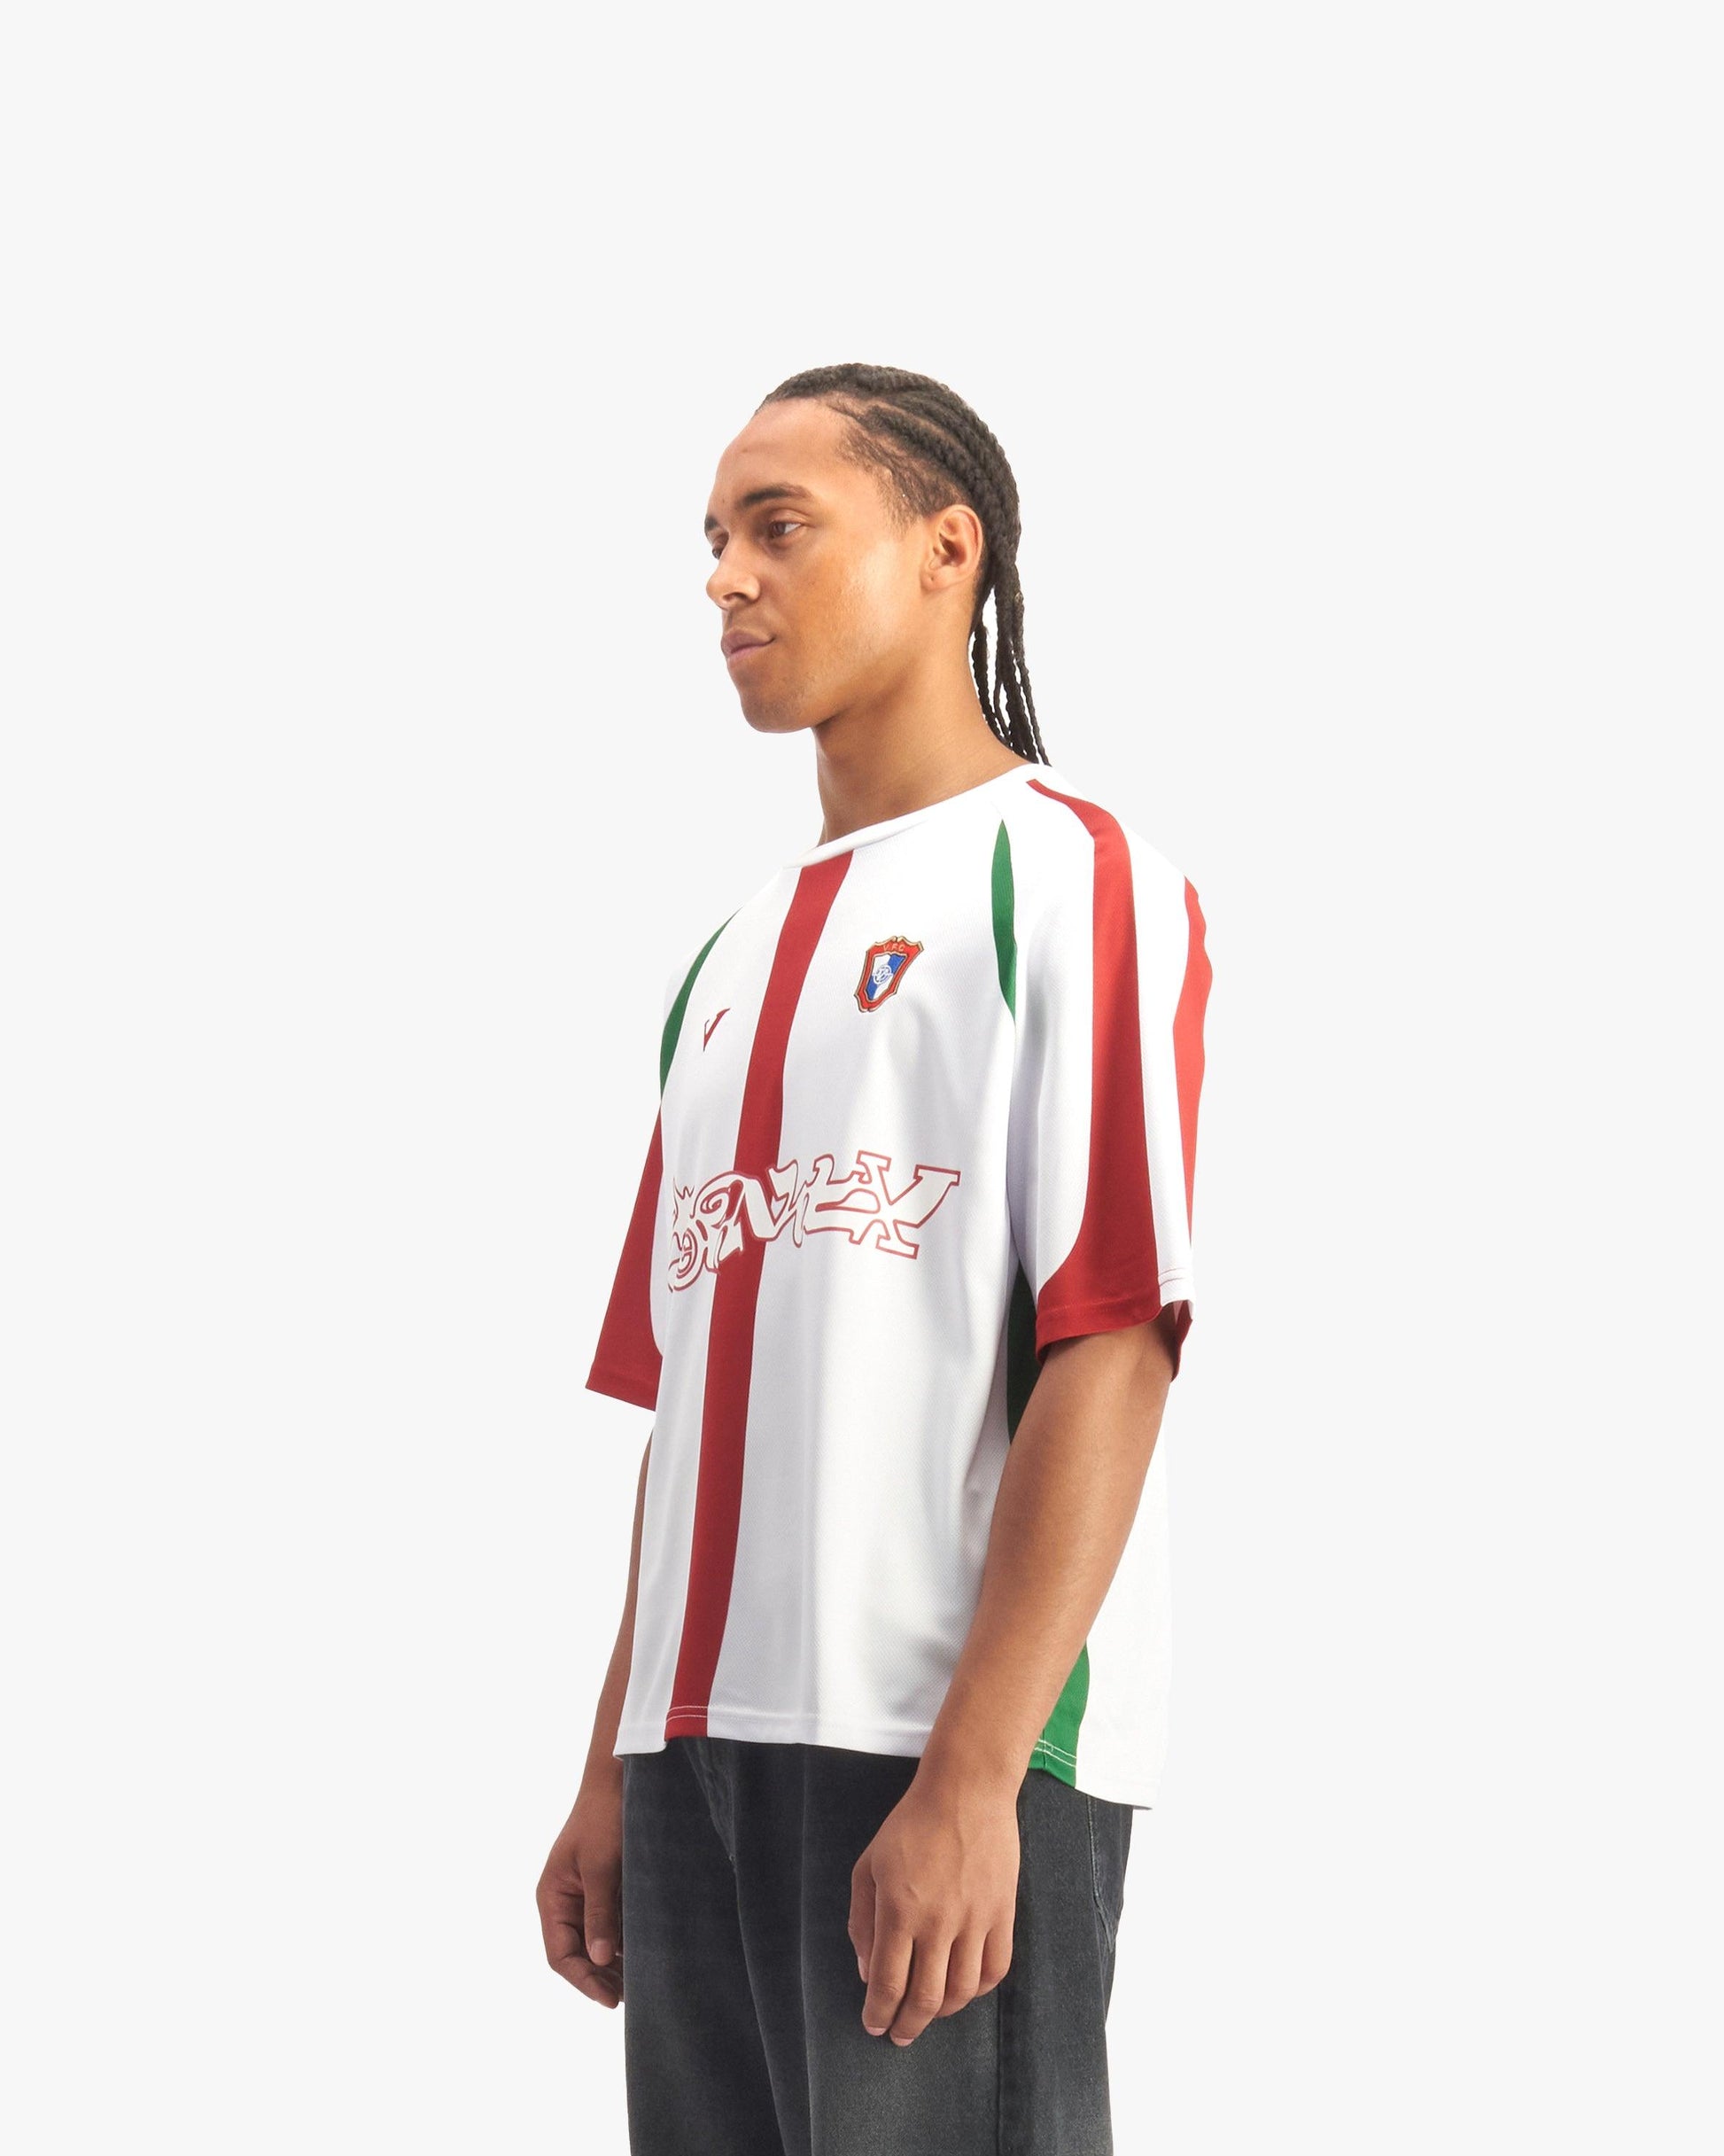 PORTUGAL JERSEY - VICINITY